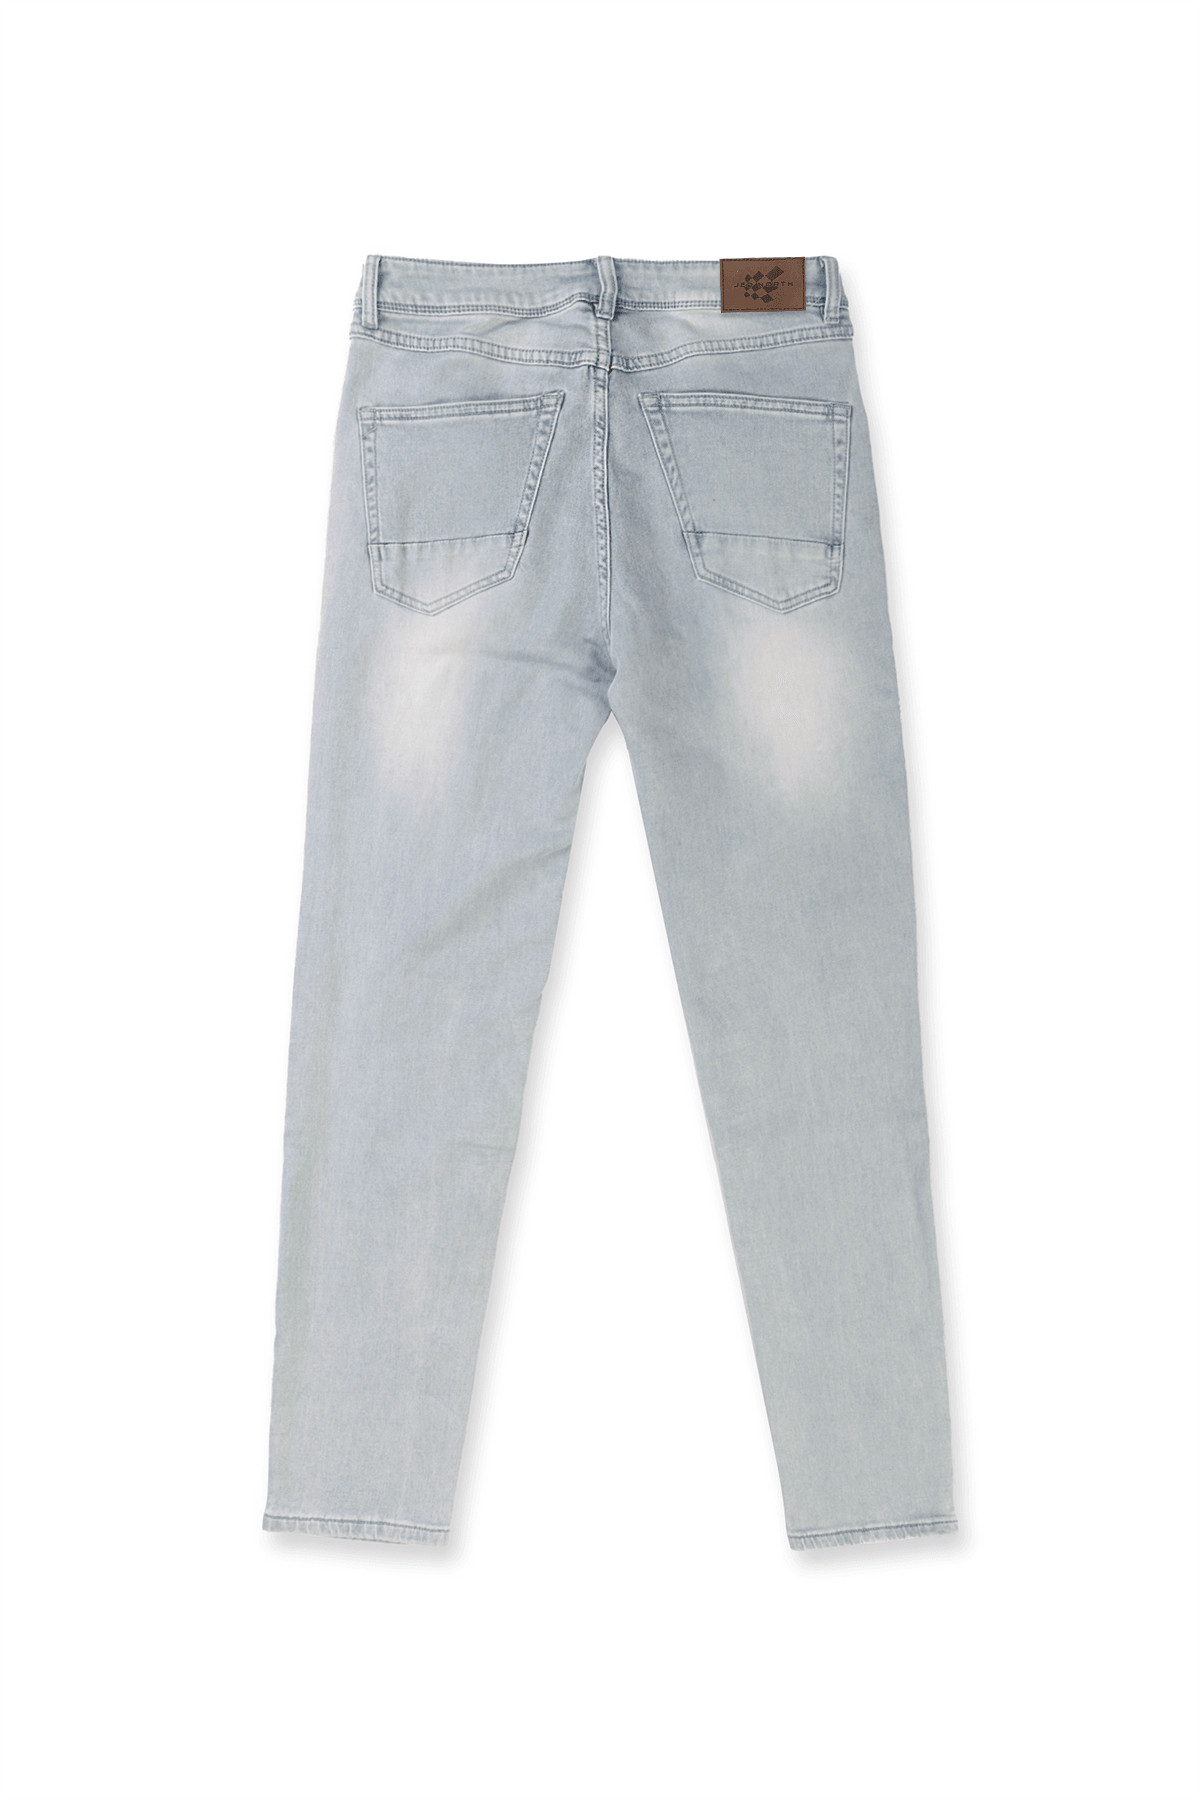 Men's Premium Fitted Stretchy Jeans - Faded Light Blue - Jed North Canada